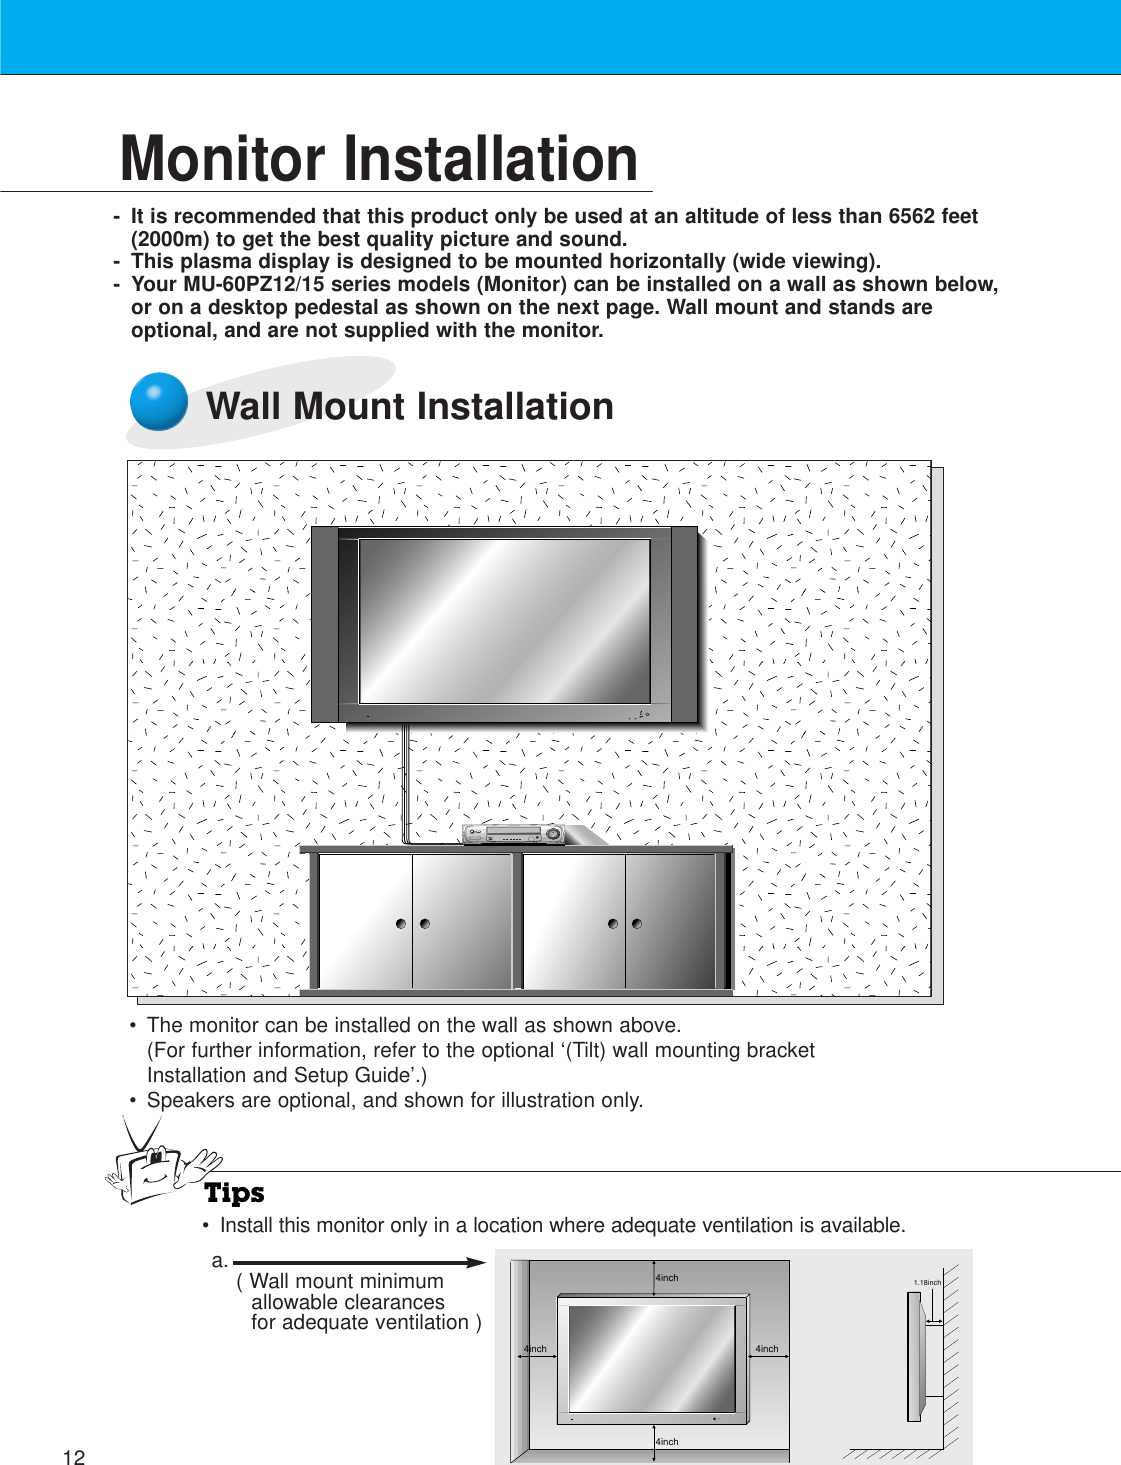 12Monitor Installation- It is recommended that this product only be used at an altitude of less than 6562 feet(2000m) to get the best quality picture and sound.- This plasma display is designed to be mounted horizontally (wide viewing).- Your MU-60PZ12/15 series models (Monitor) can be installed on a wall as shown below,or on a desktop pedestal as shown on the next page. Wall mount and stands areoptional, and are not supplied with the monitor.Wall Mount Installation•The monitor can be installed on the wall as shown above.(For further information, refer to the optional ‘(Tilt) wall mounting bracketInstallation and Setup Guide’.)• Speakers are optional, and shown for illustration only.Tips•Install this monitor only in a location where adequate ventilation is available.4inch4inch4inch4inch1.18incha. ( Wall mount minimumallowable clearancesfor adequate ventilation )